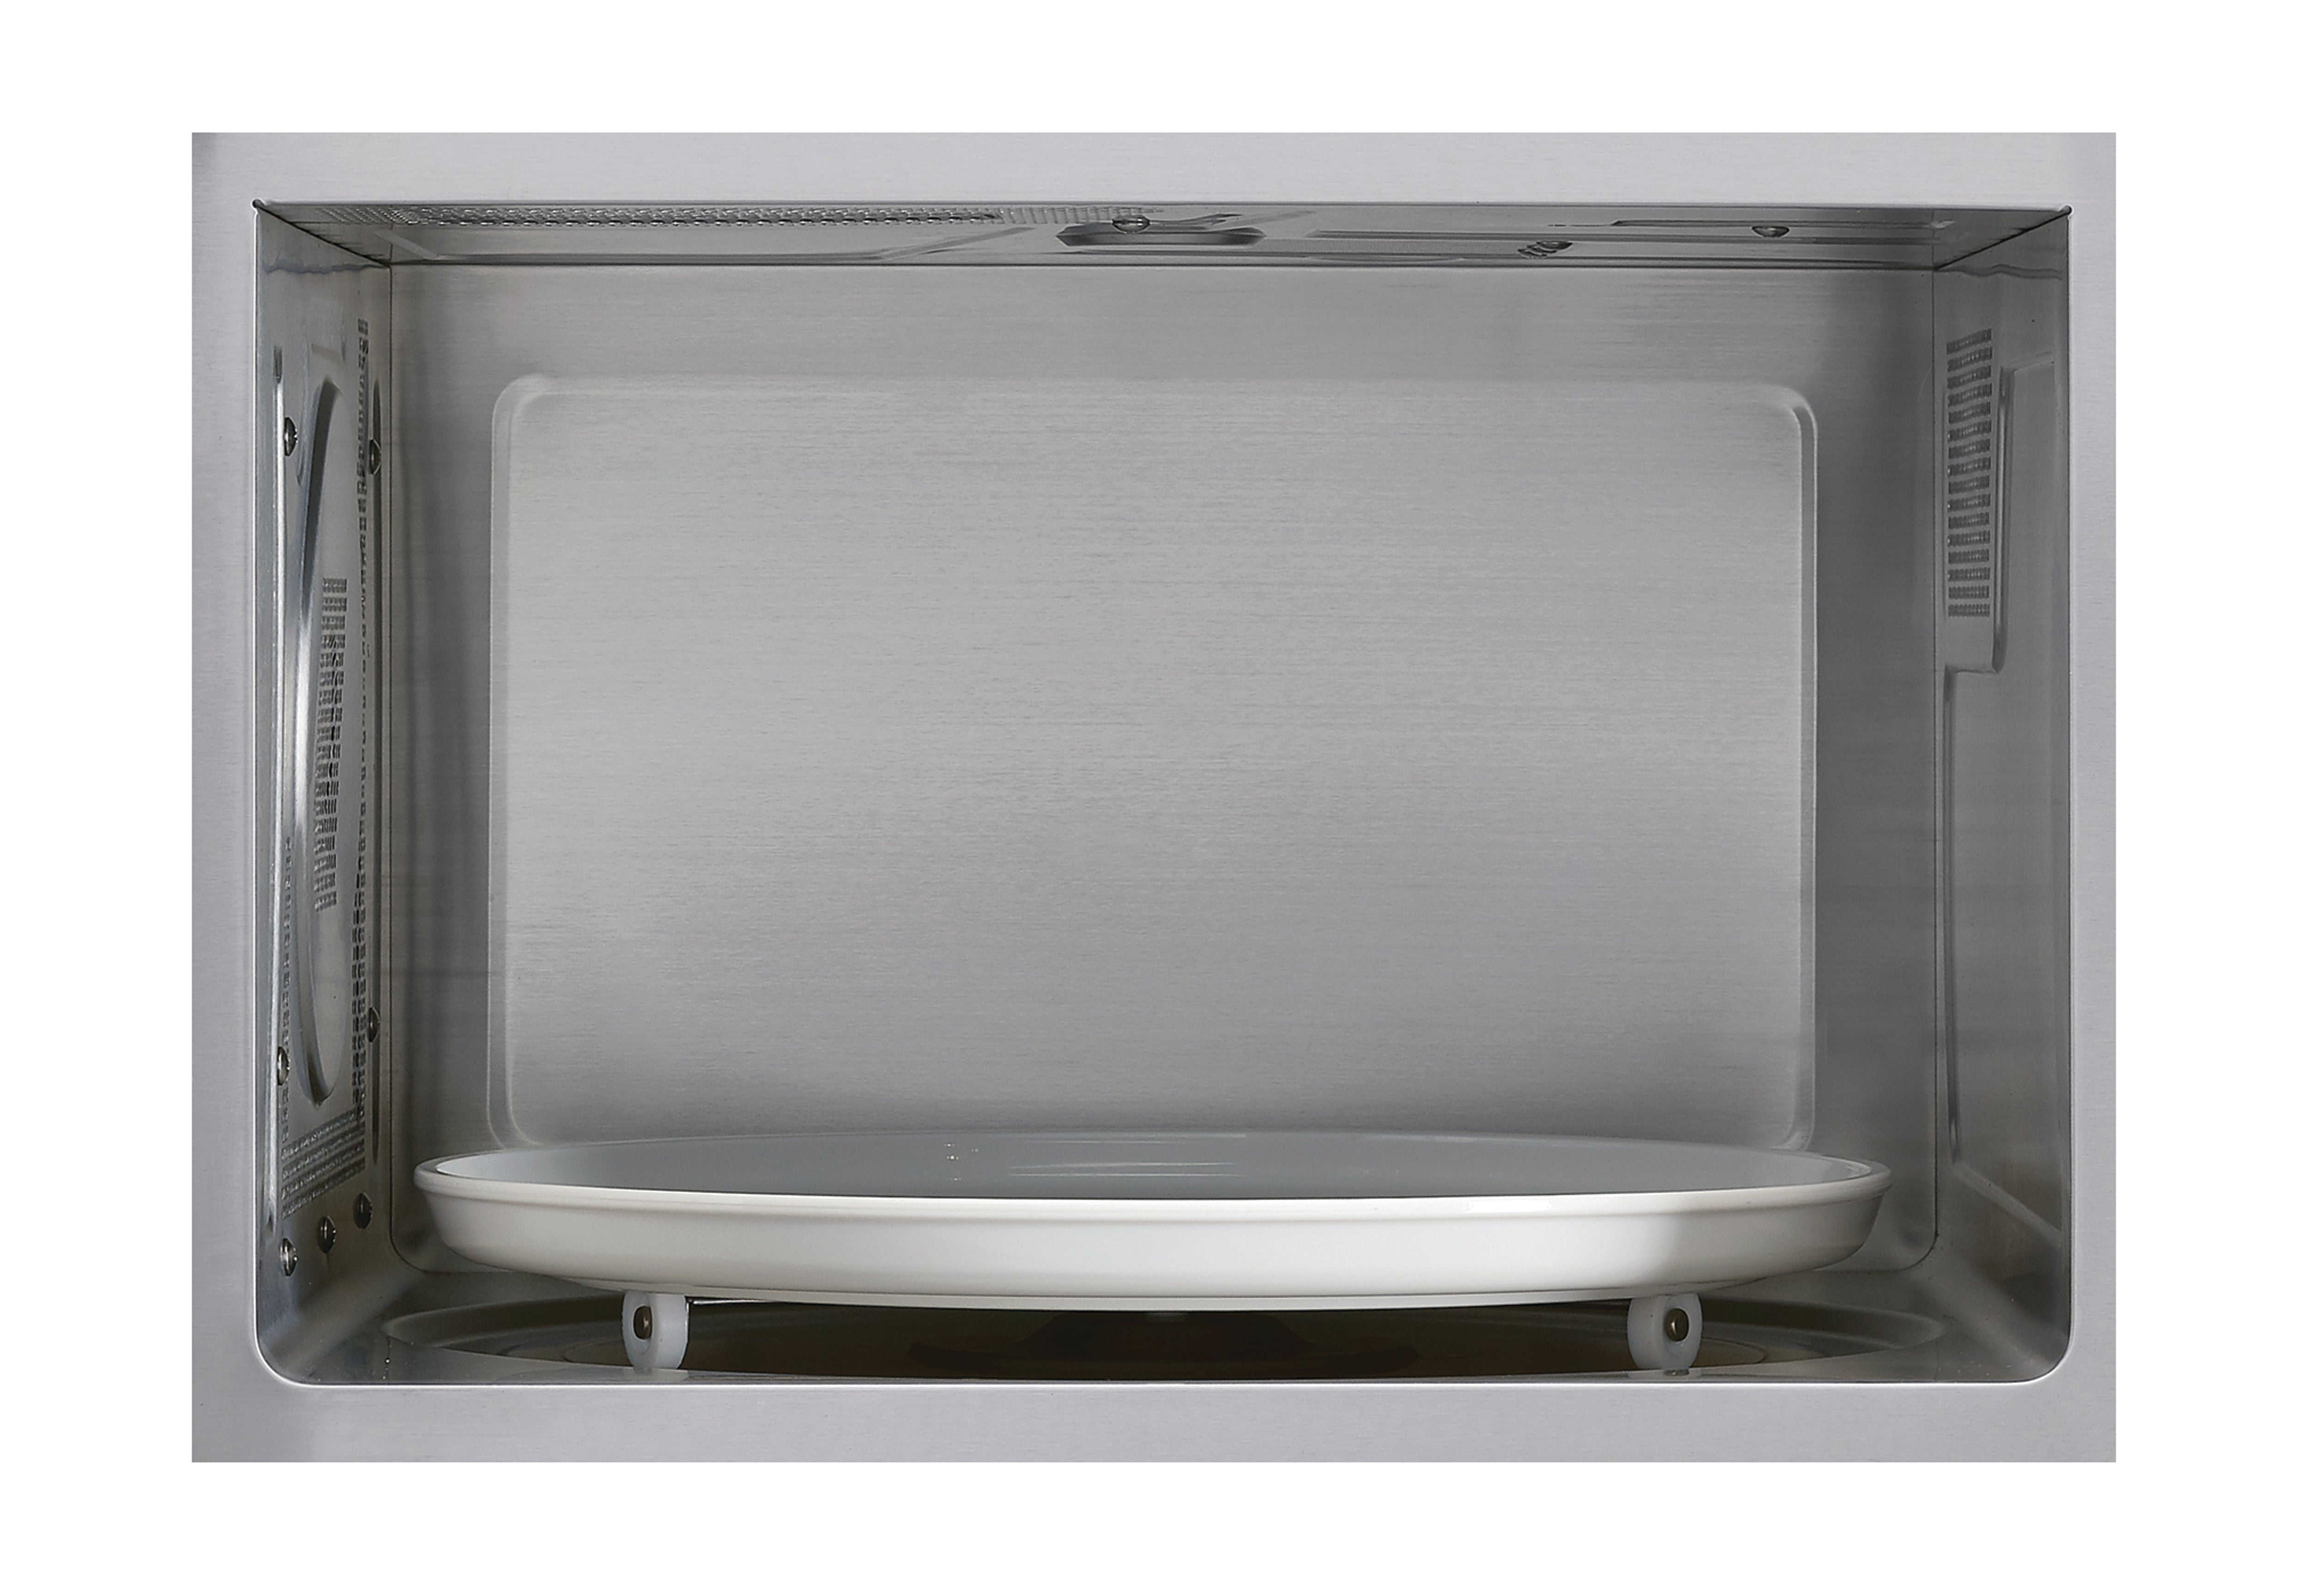 Sharp - 1.5 cu. Ft  Counter top Microwave in Stainless - SMC1585BS